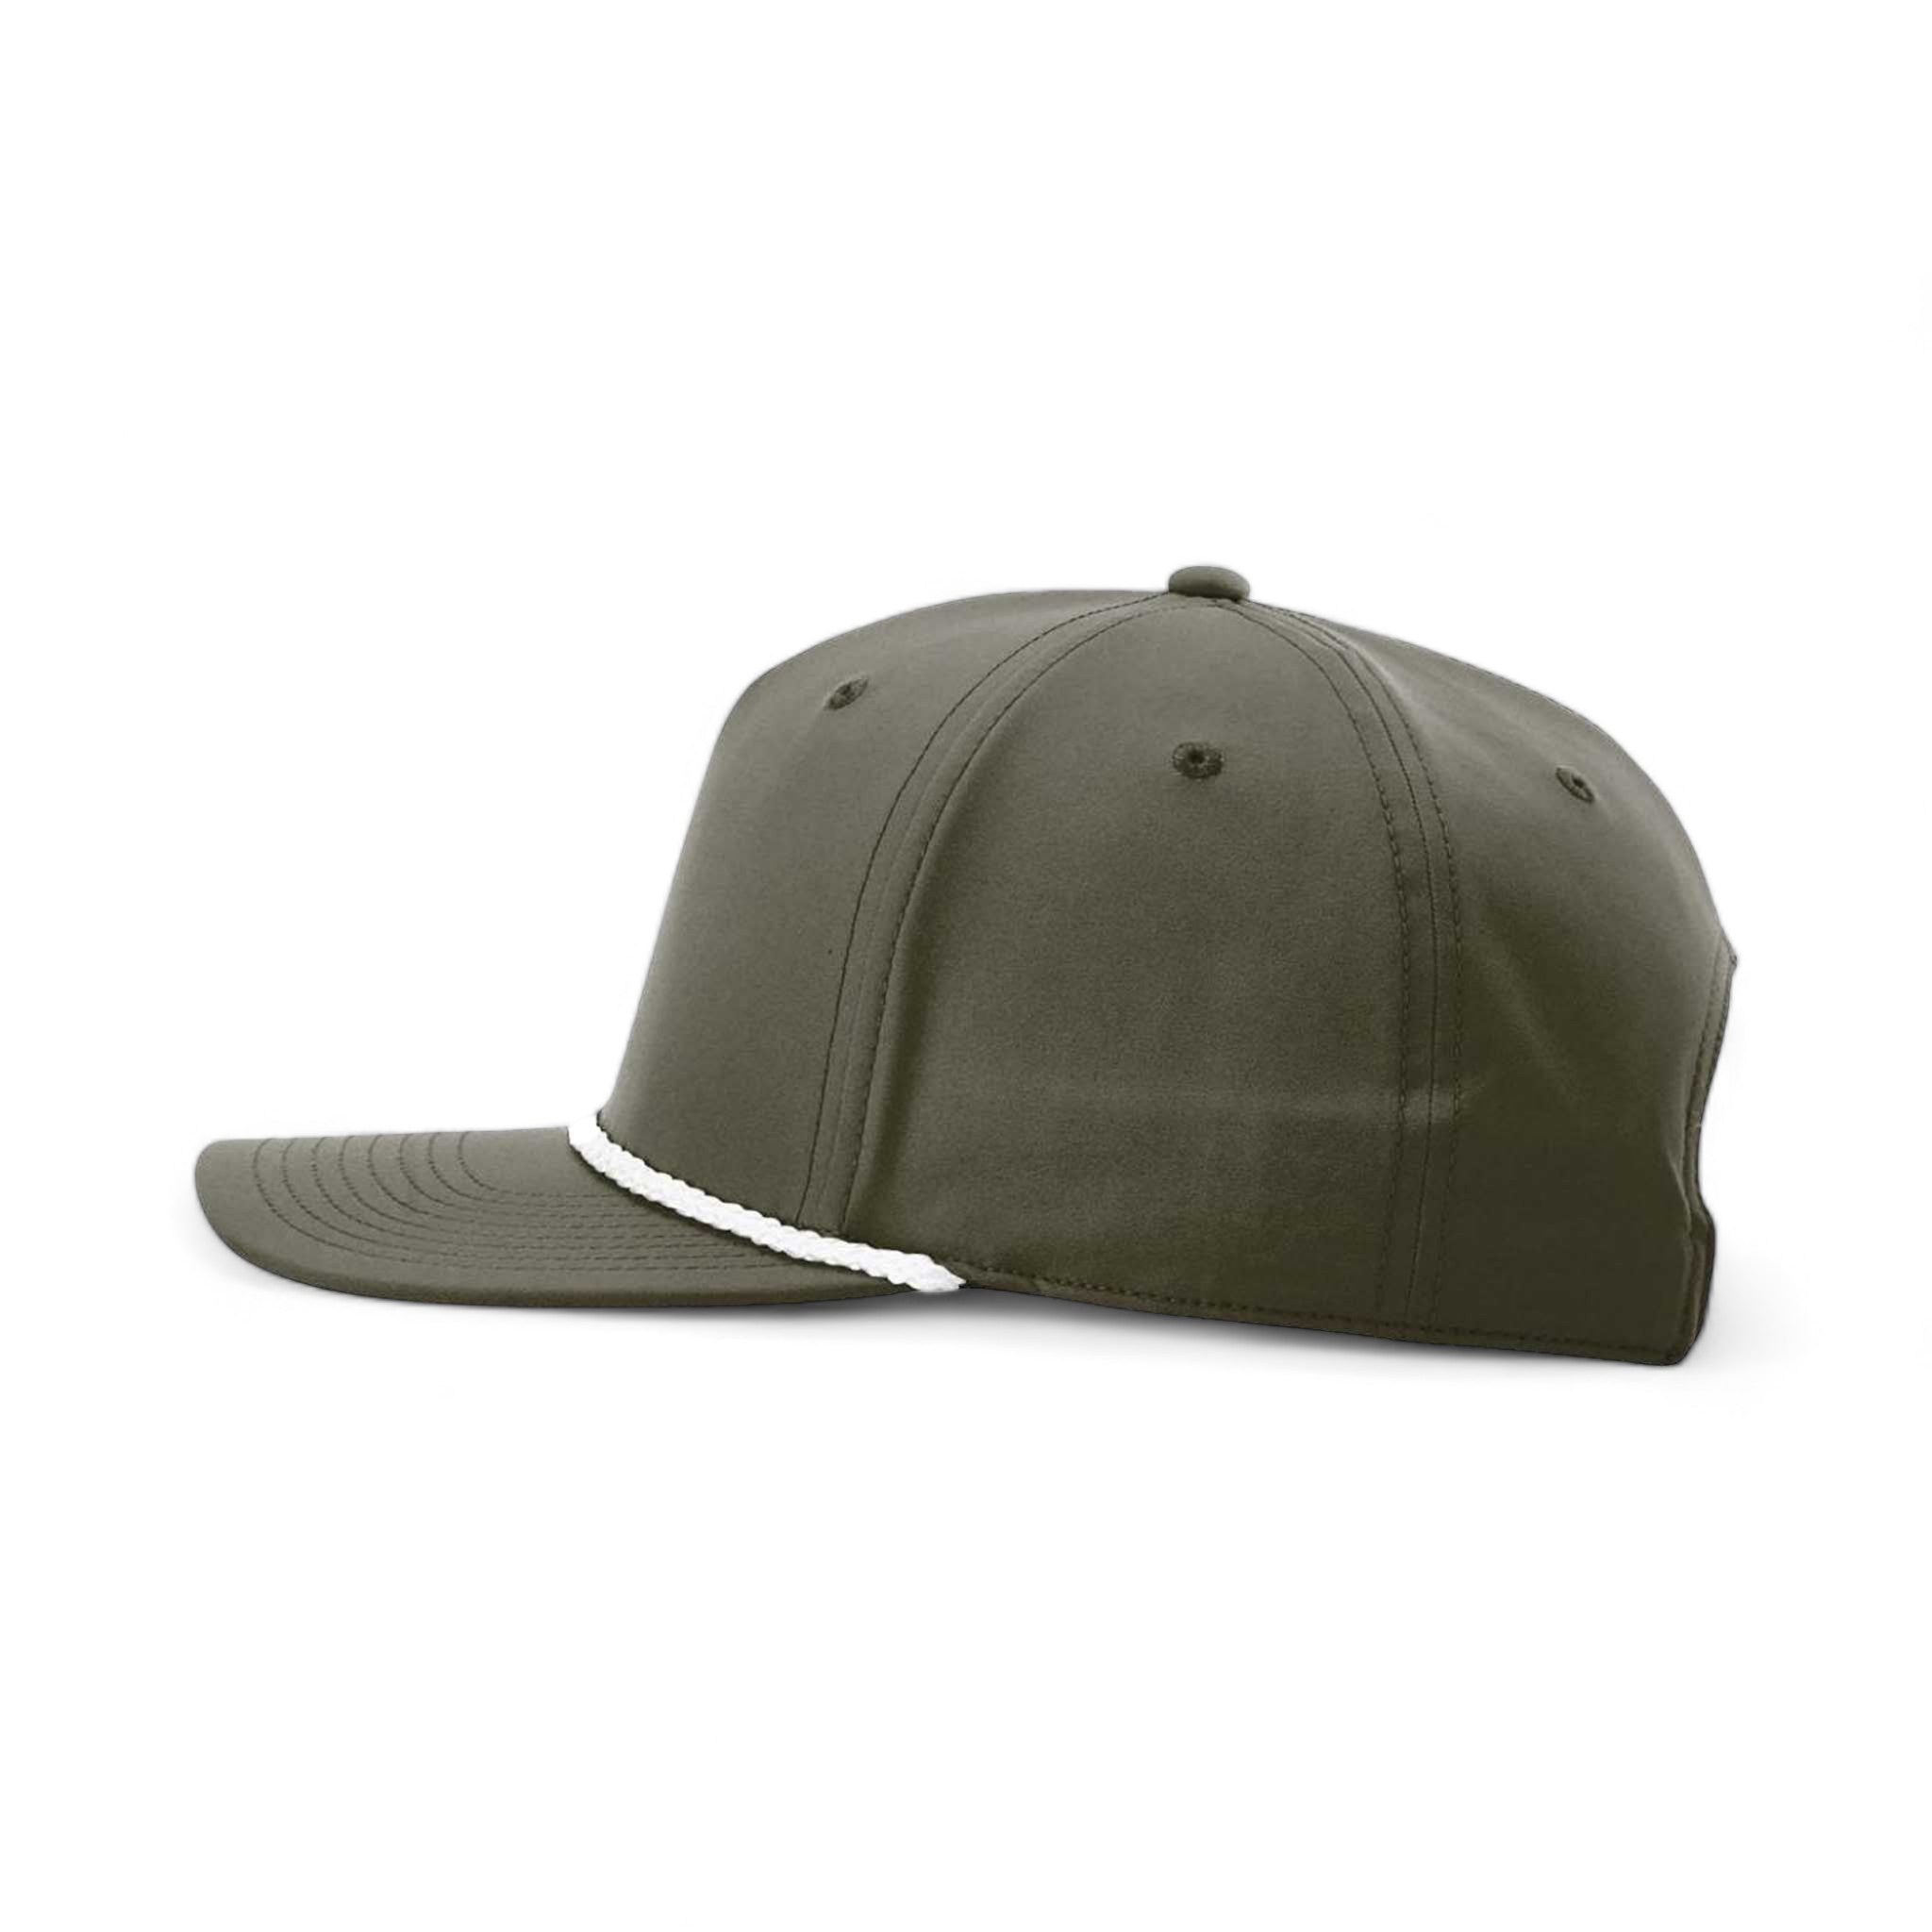 Side view of Richardson 258 custom hat in dark olive green and white